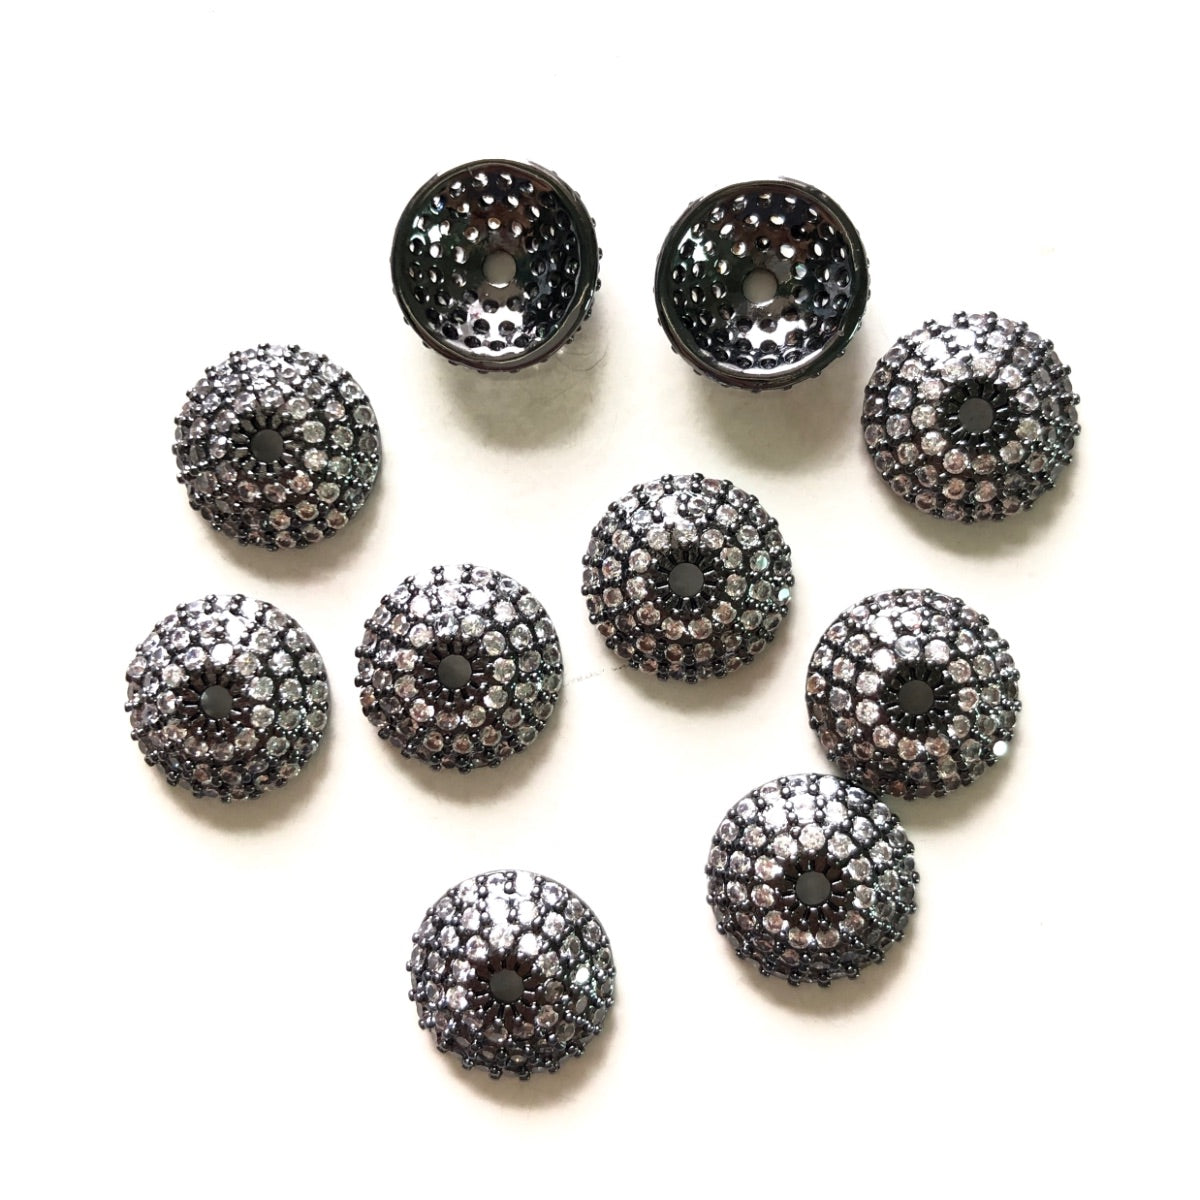 20pcs/lot 8/10/11mm Half Round CZ Paved Beads Caps Spacers Black CZ Paved Spacers Beads Caps New Spacers Arrivals Charms Beads Beyond